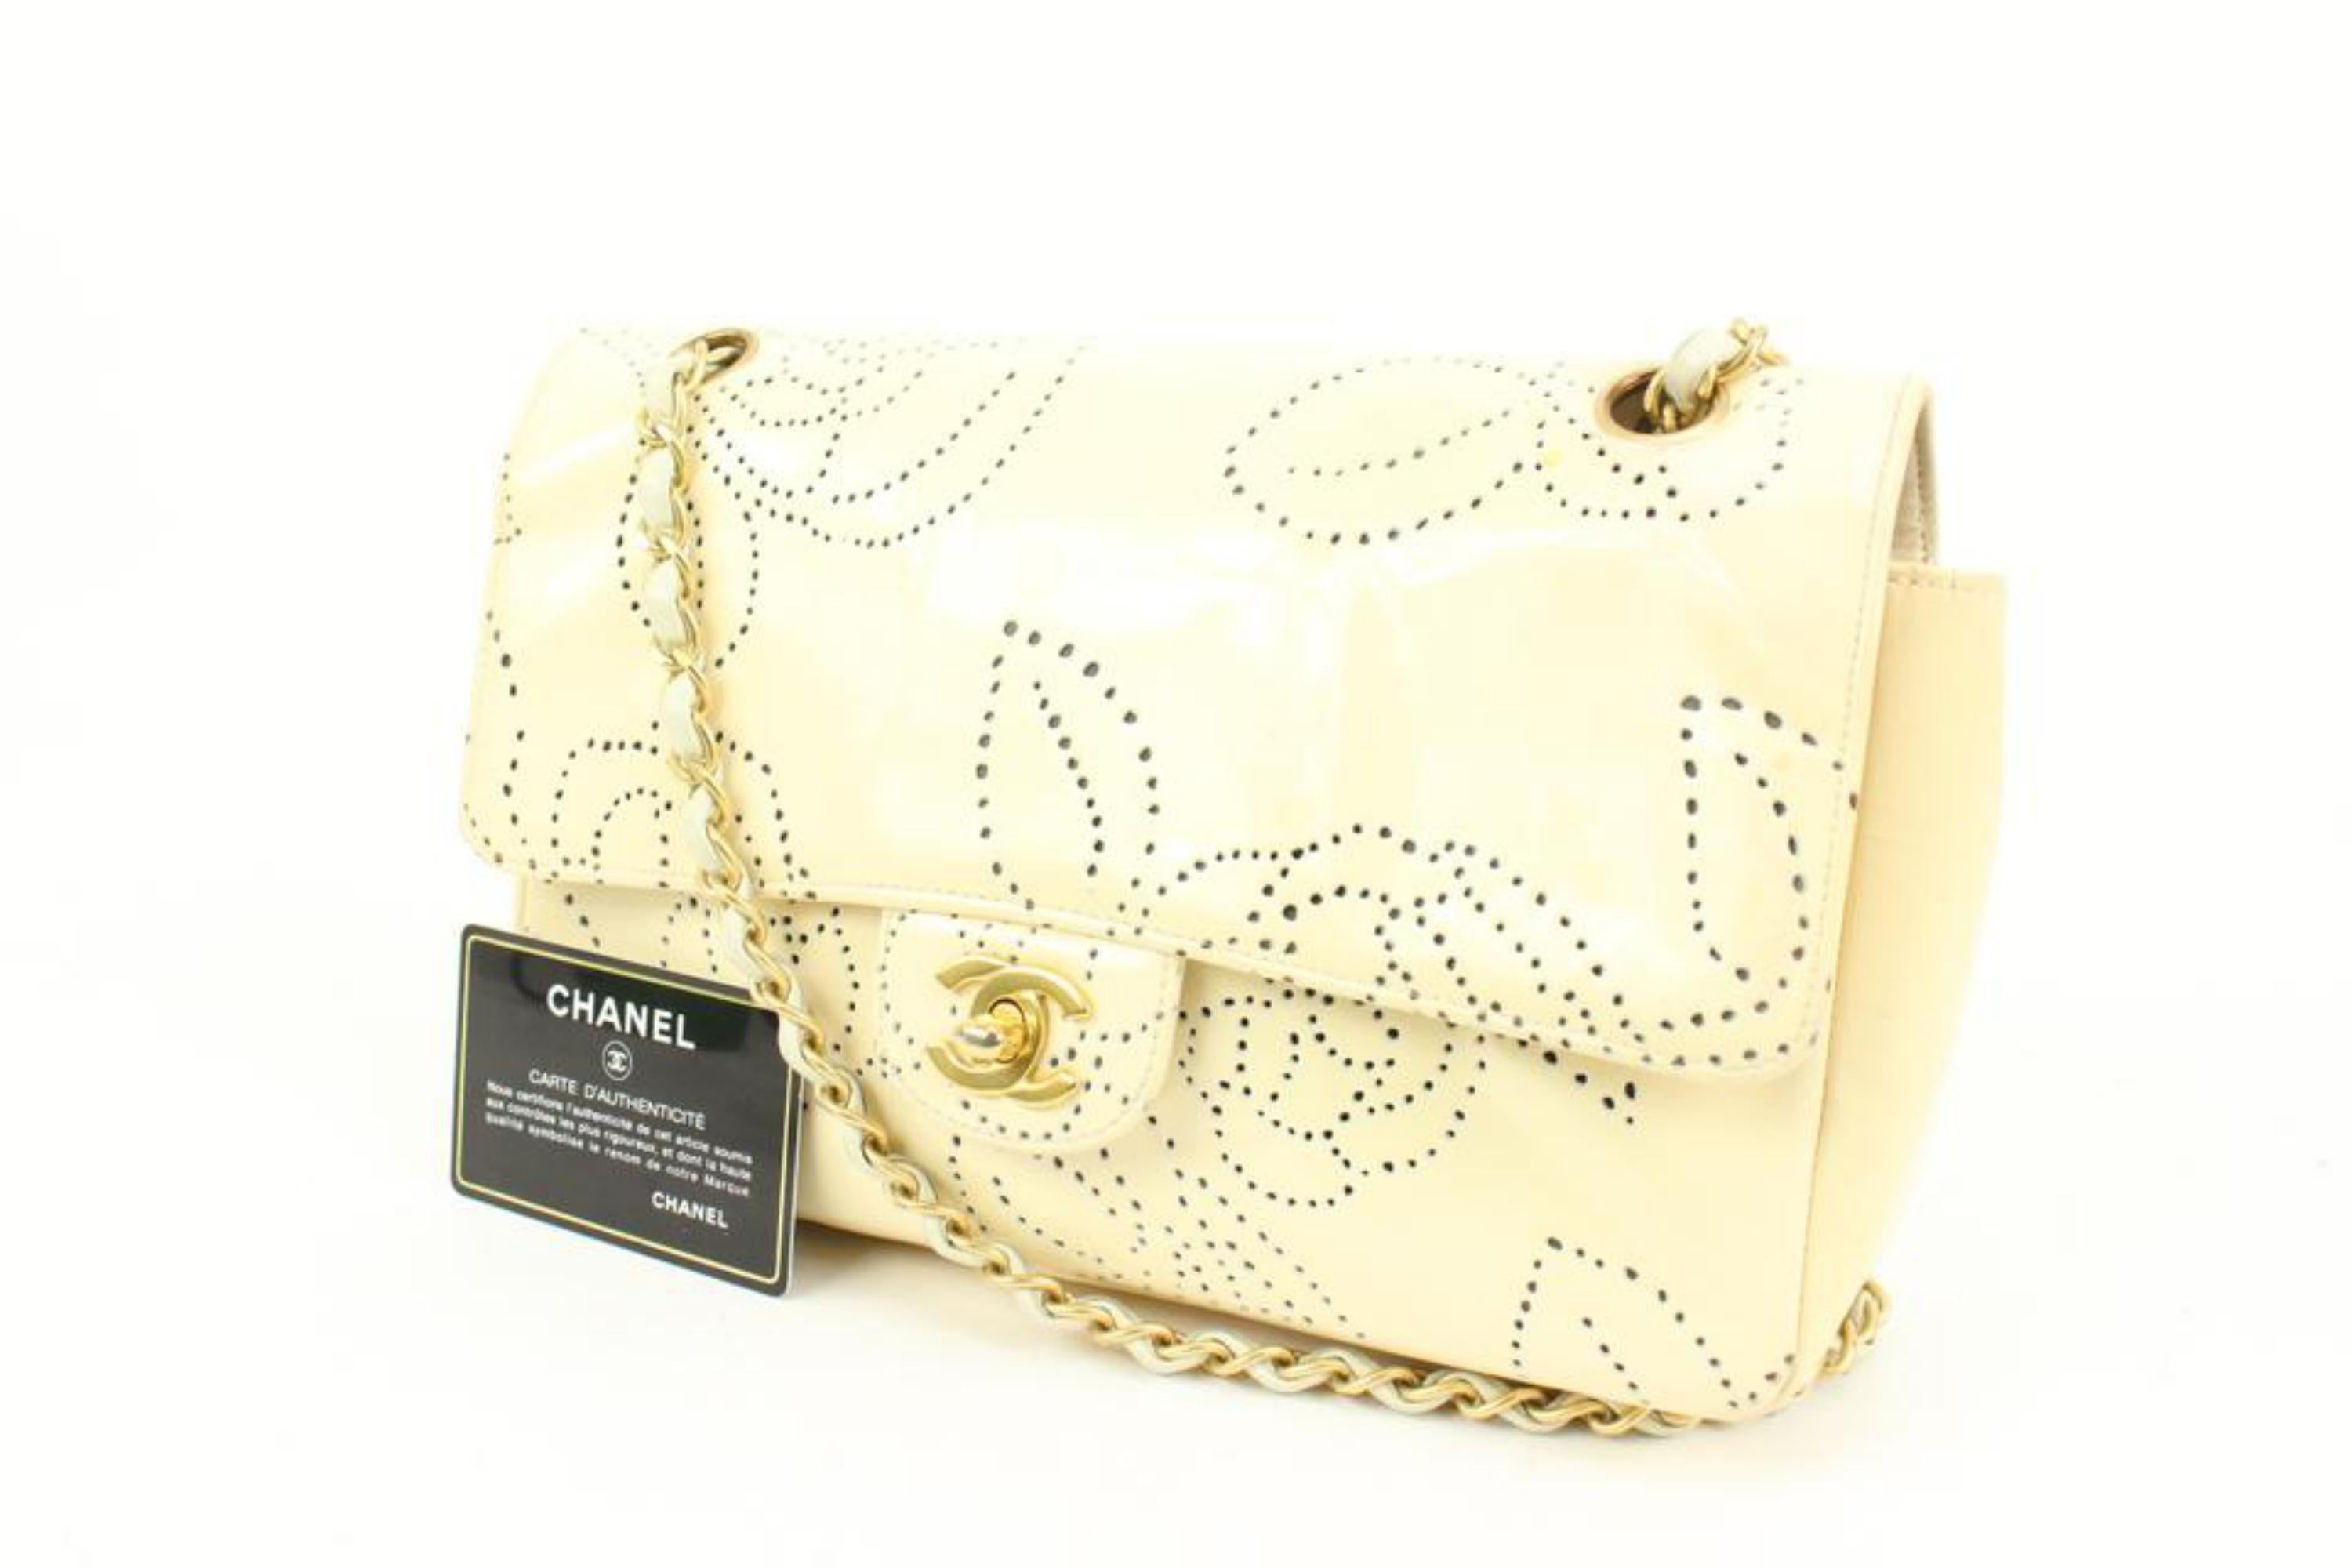 Chanel 2003 Cream Camelia Perforated Patent Medium Classic Flap GHW Fl41ck73
Date Code/Serial Number: 8268270
Made In: France
Measurements: Length:  9.5